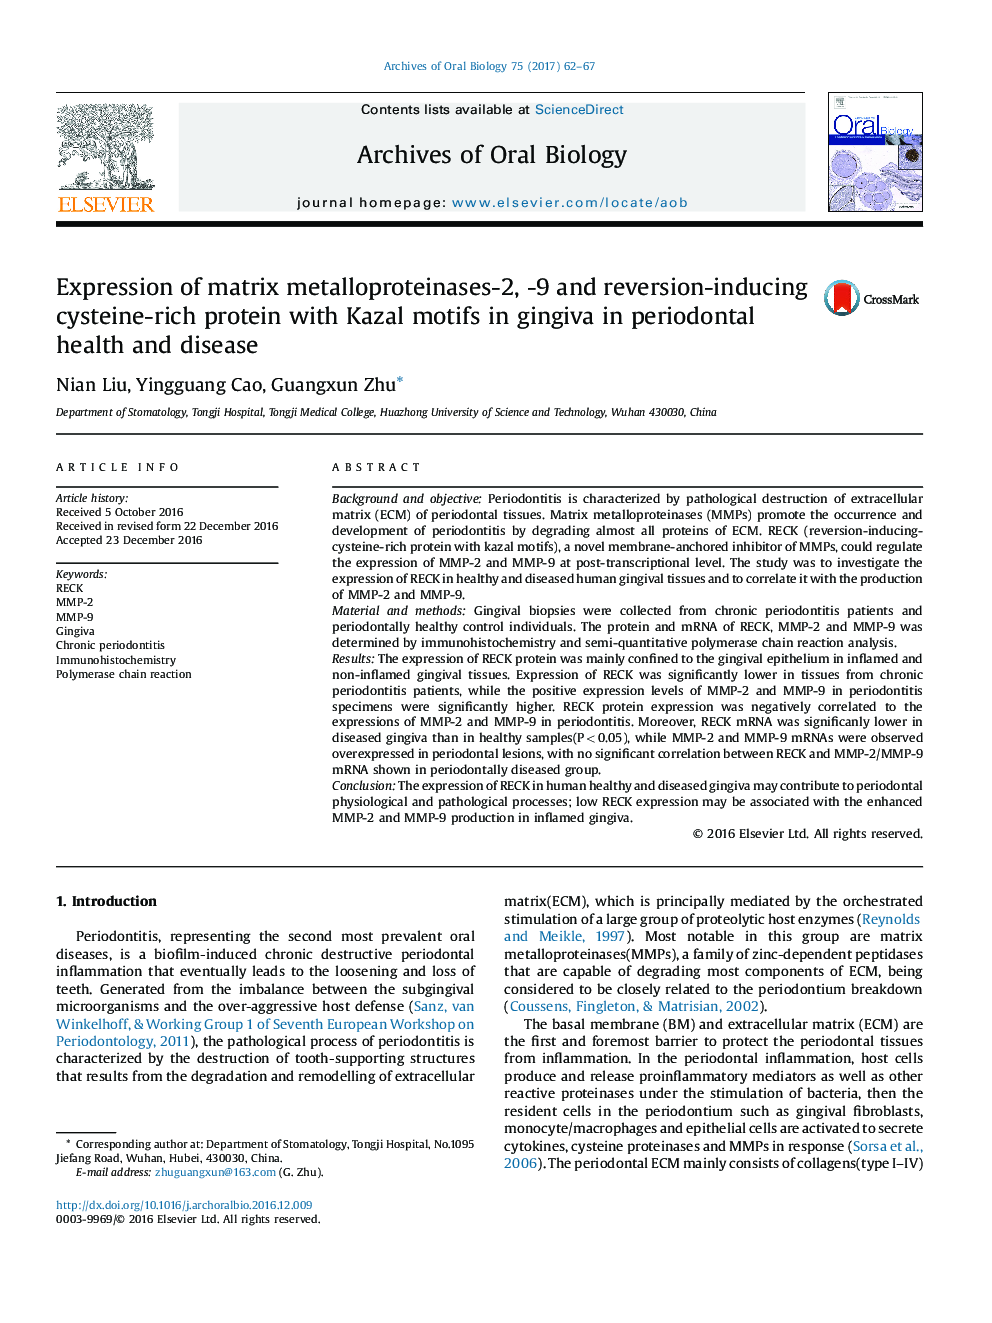 Expression of matrix metalloproteinases-2, -9 and reversion-inducing cysteine-rich protein with Kazal motifs in gingiva in periodontal health and disease